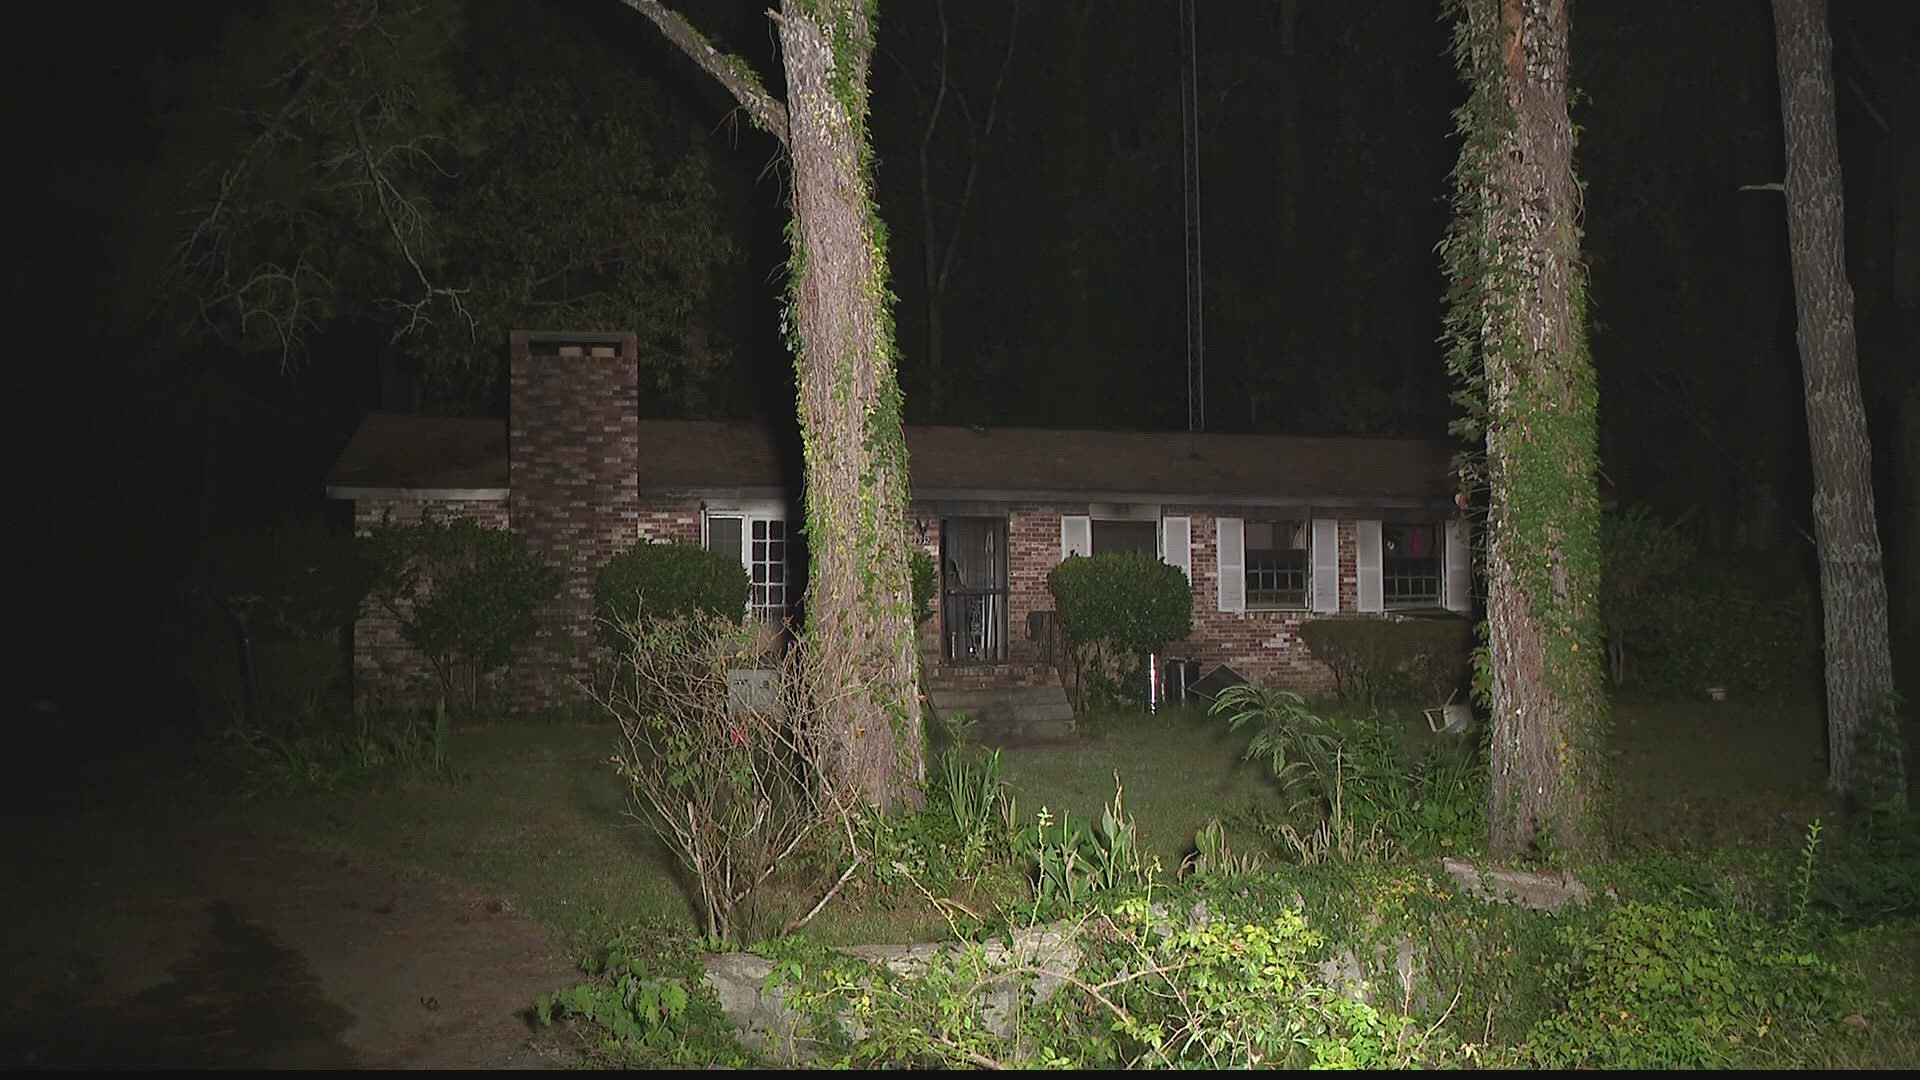 Two brothers lived inside the home. One was able to escape and call 911.